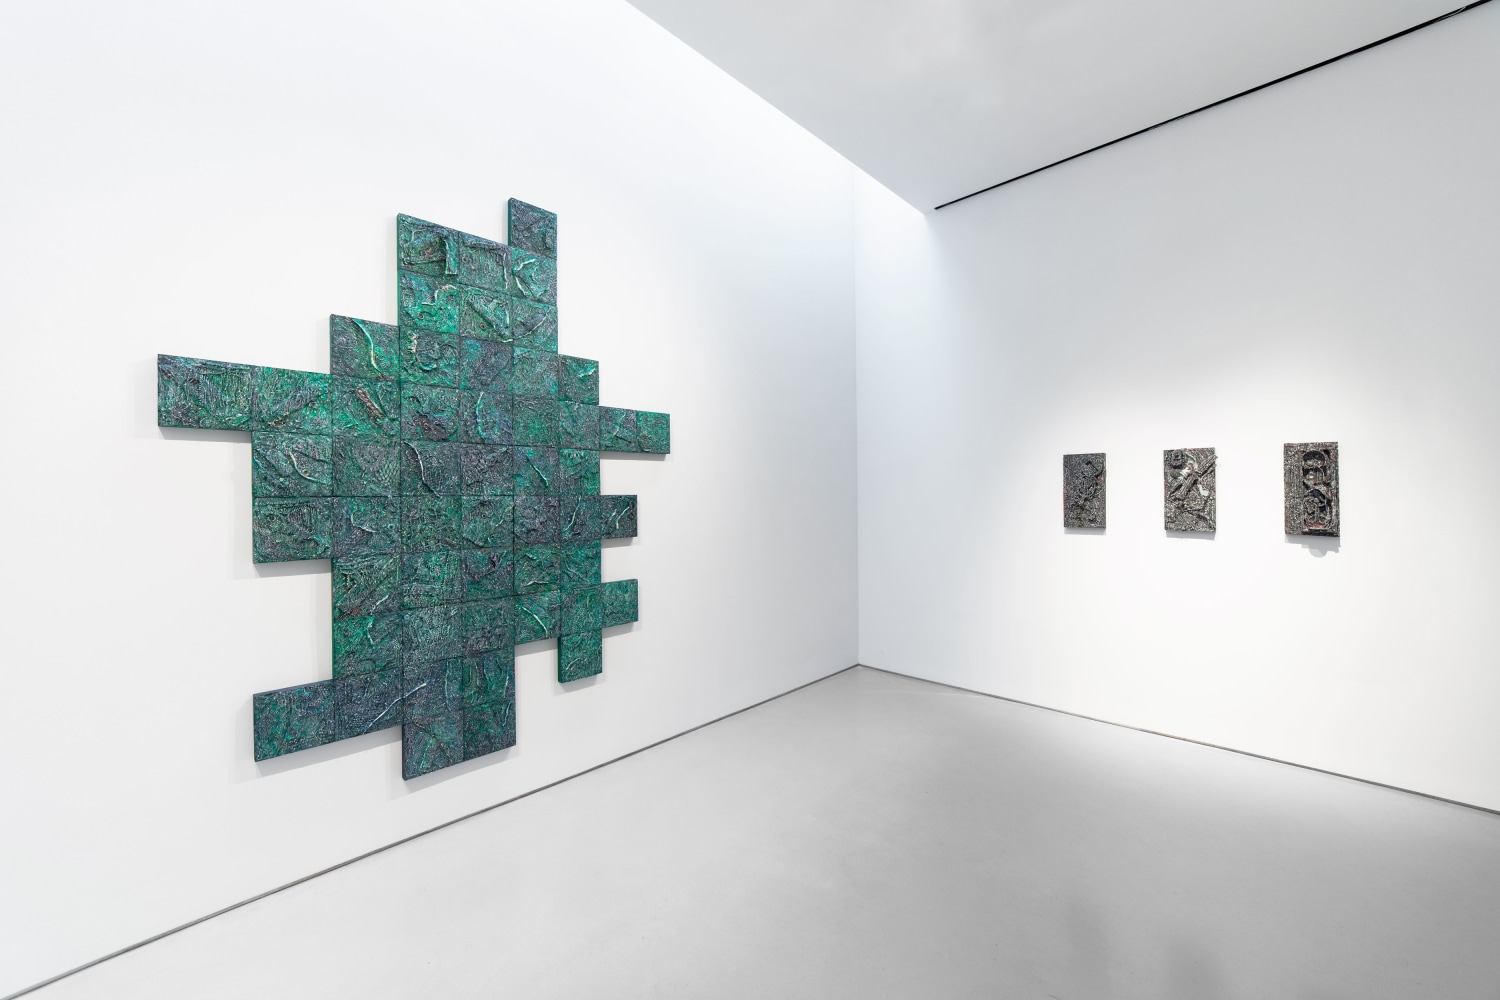 Large green geometric artwork is hung adjacent from three small dark artworks in gallery space.